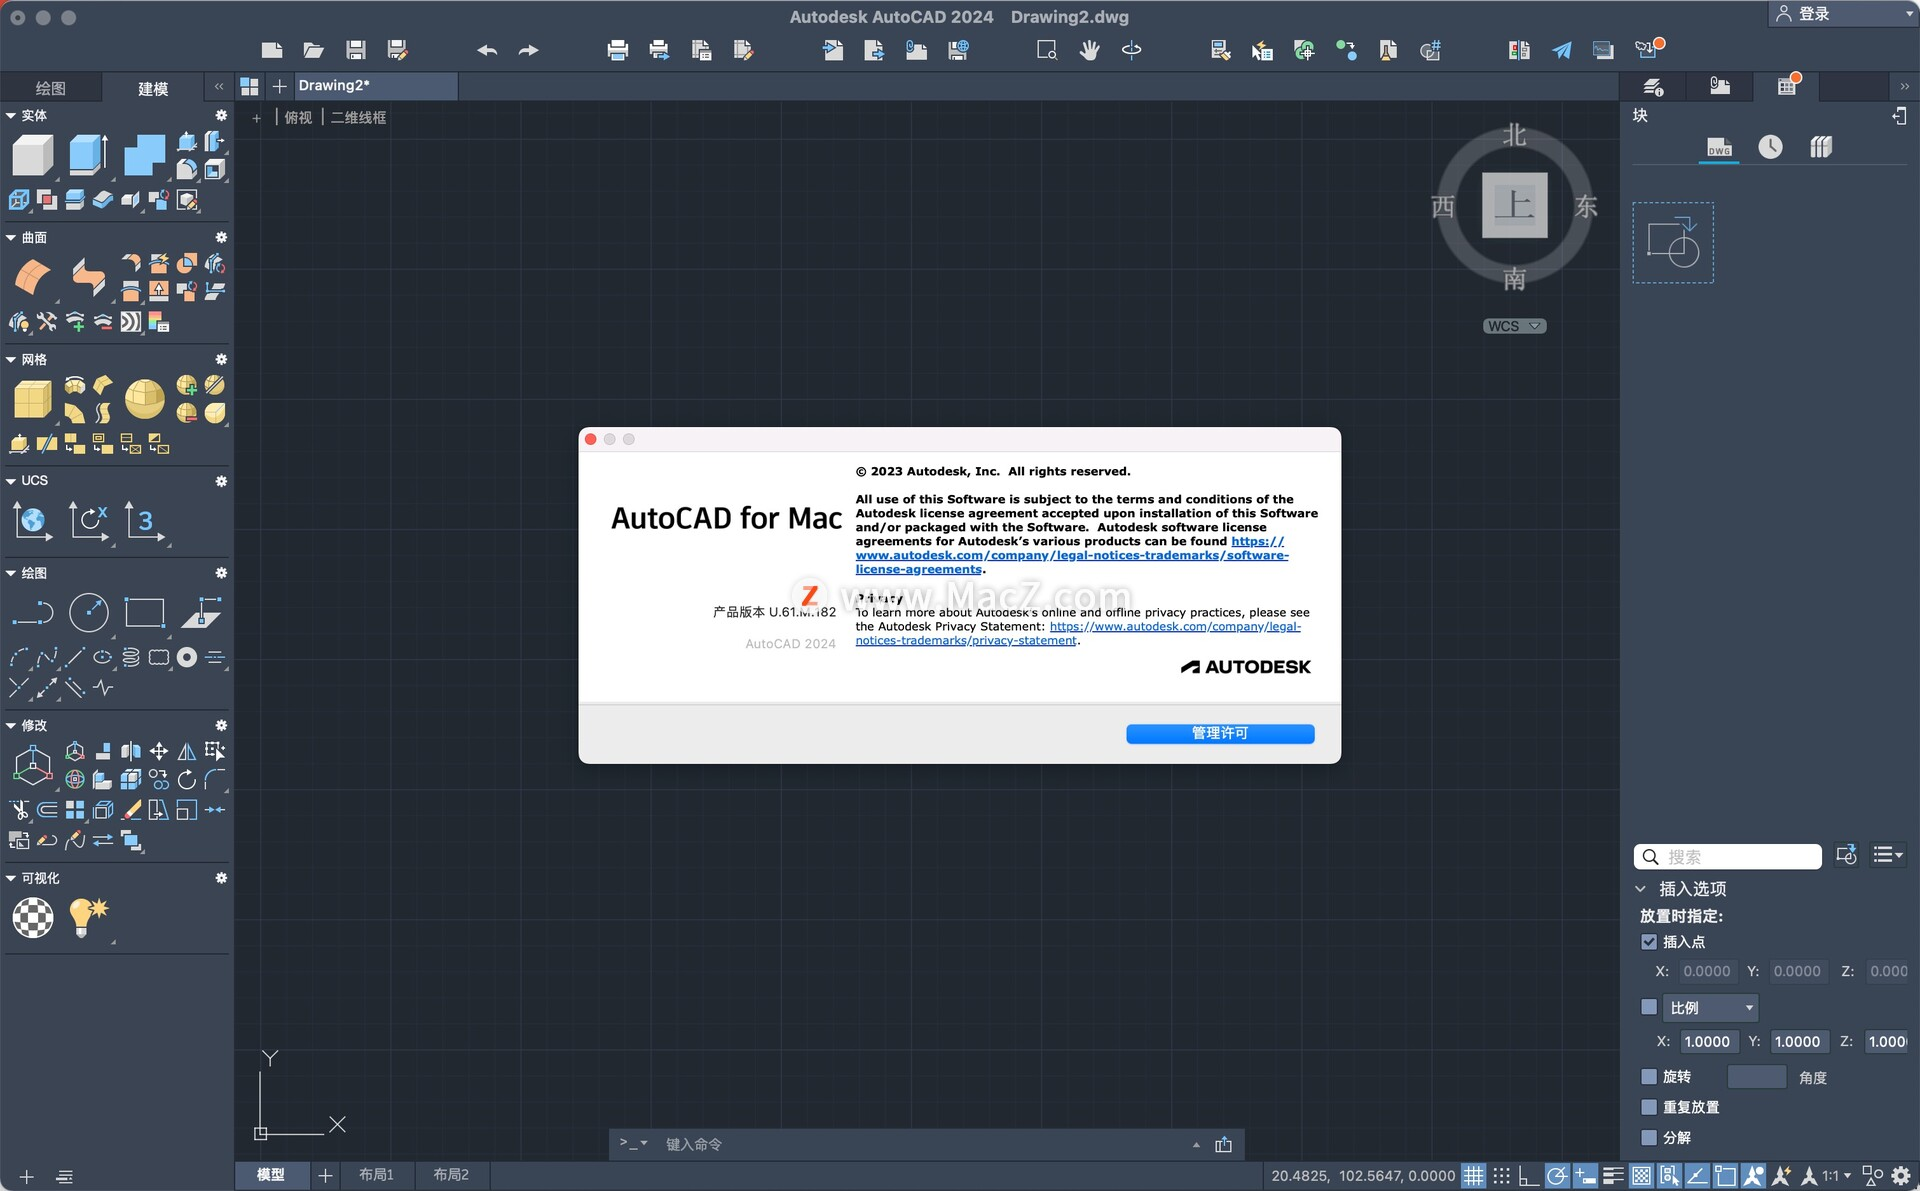 CAD图形设计工具：AutoCAD 2024 for Mac